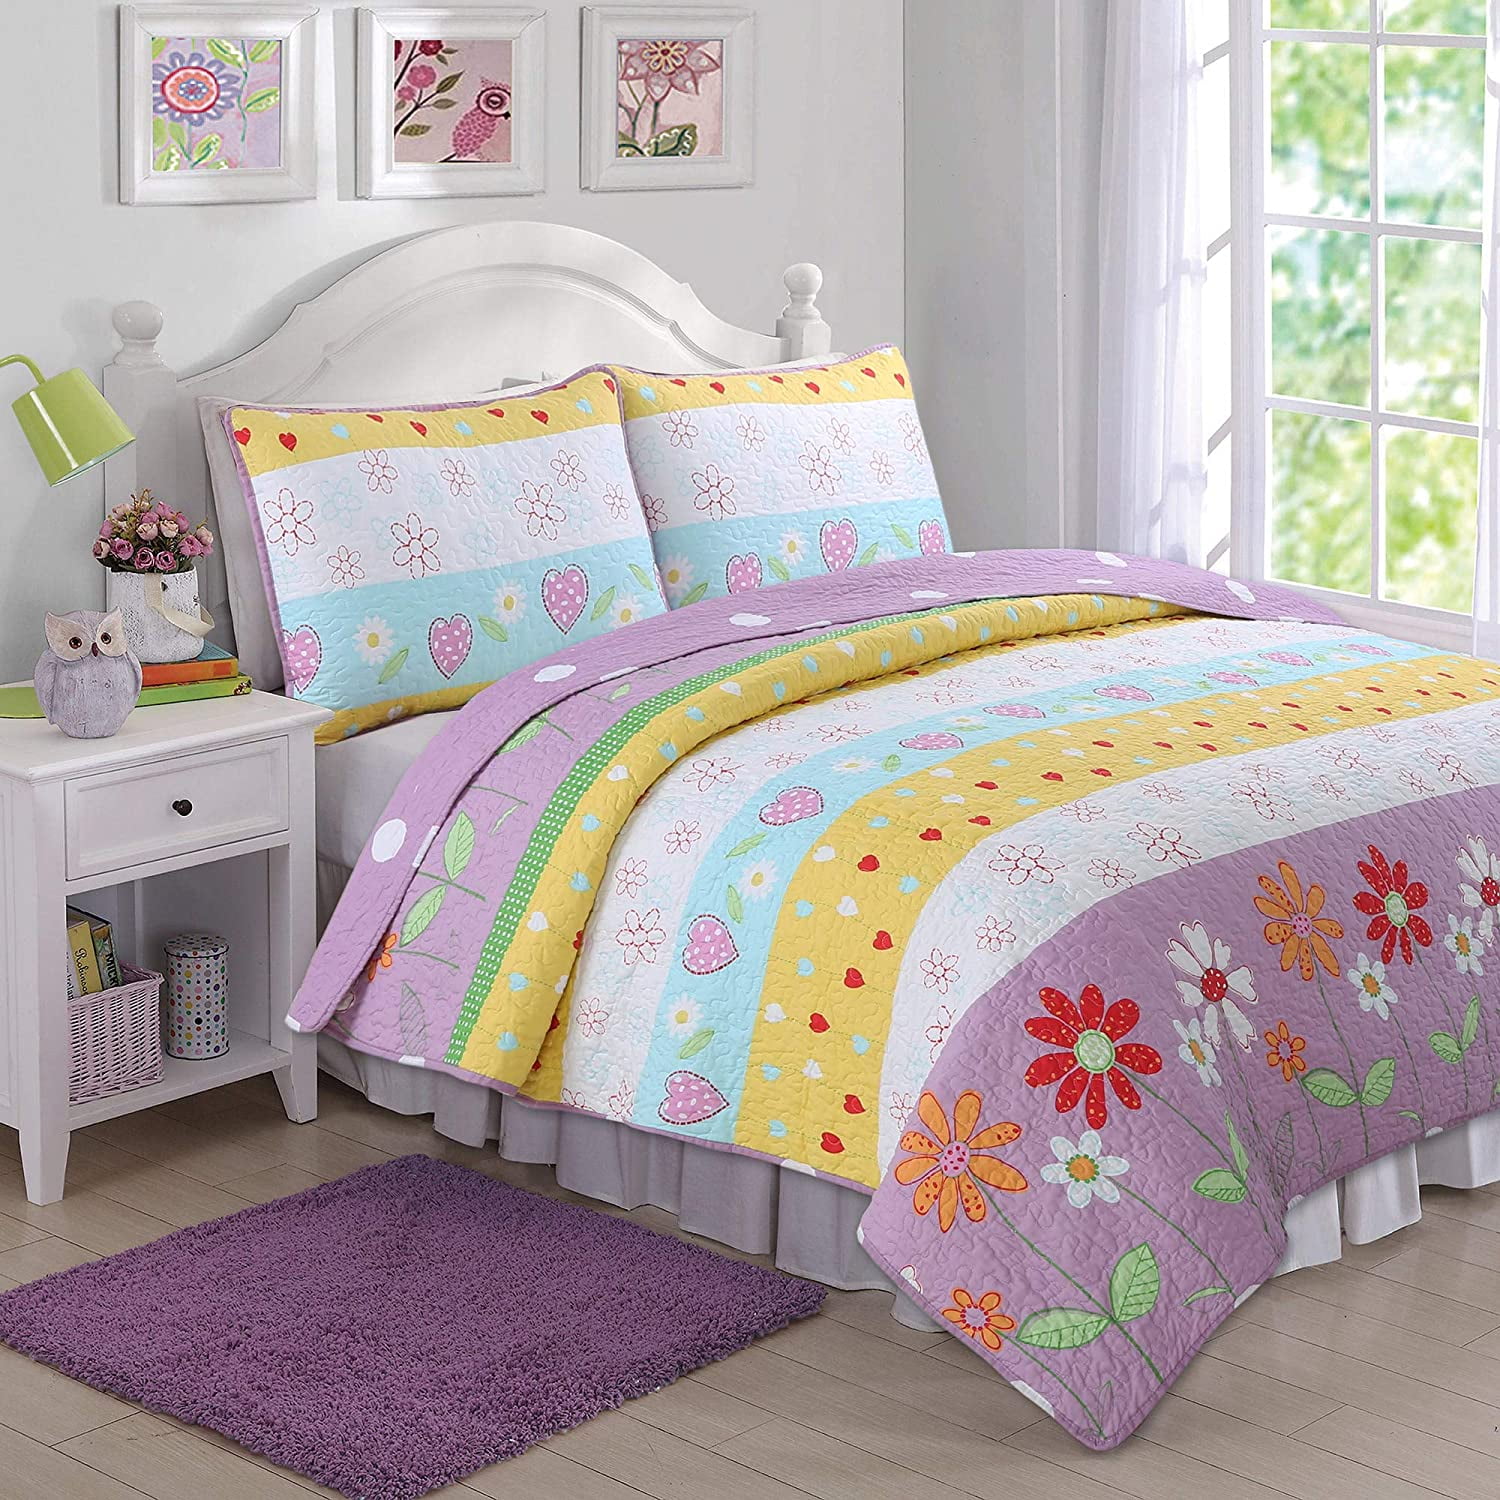 Details about   Mk Collection 4 pc Full Size Sheet Set Owls Flowers Purple Pink Teal Yellow Whit 